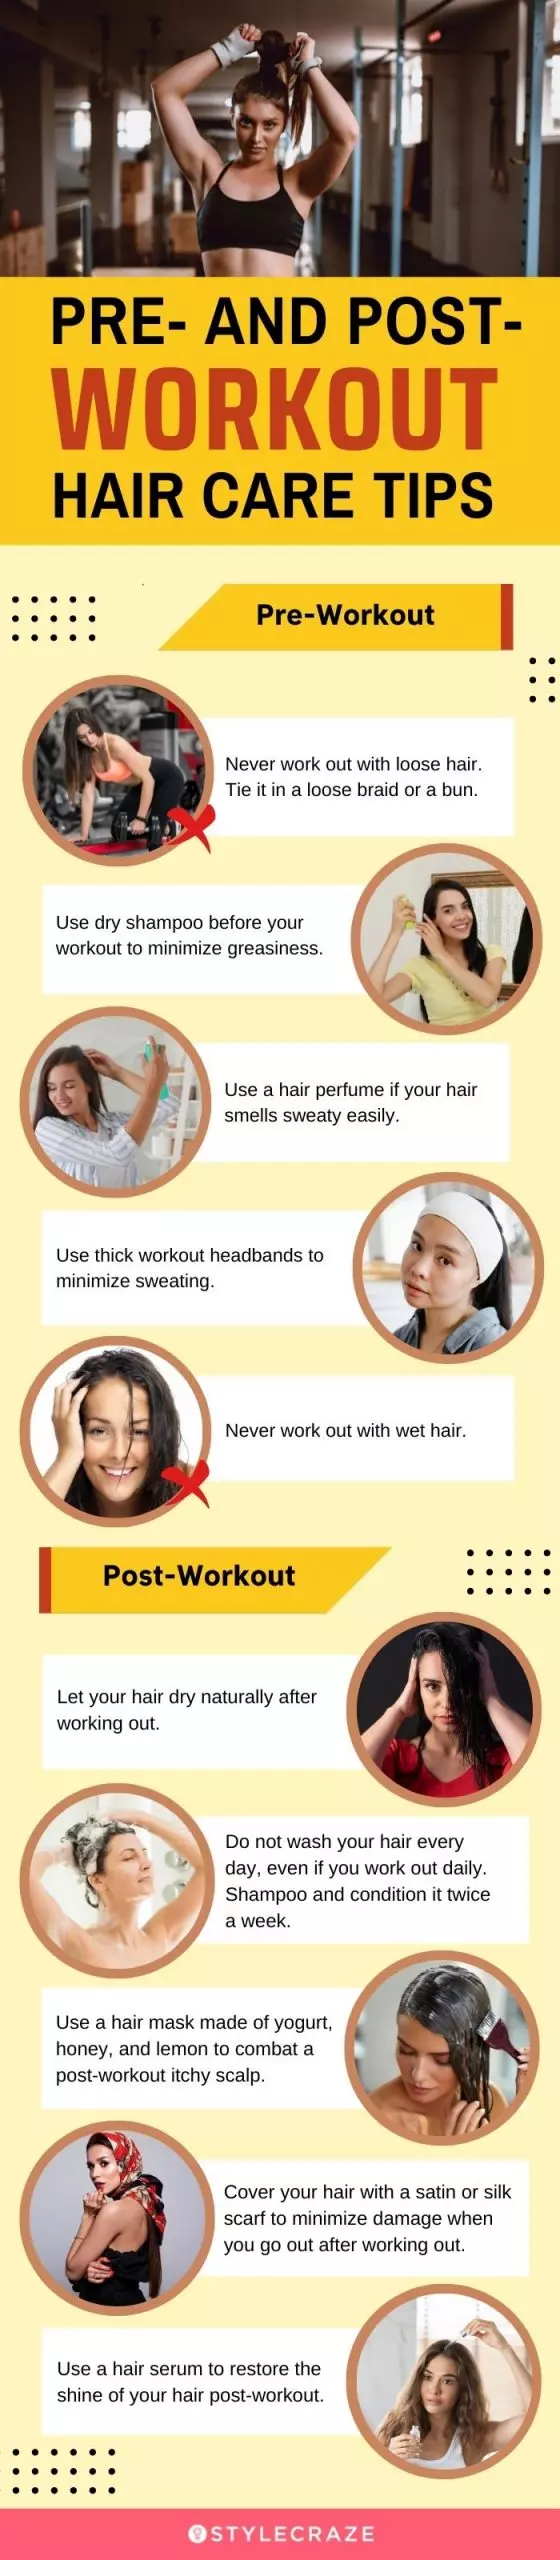 pre and post workout hair care tips (infographic)